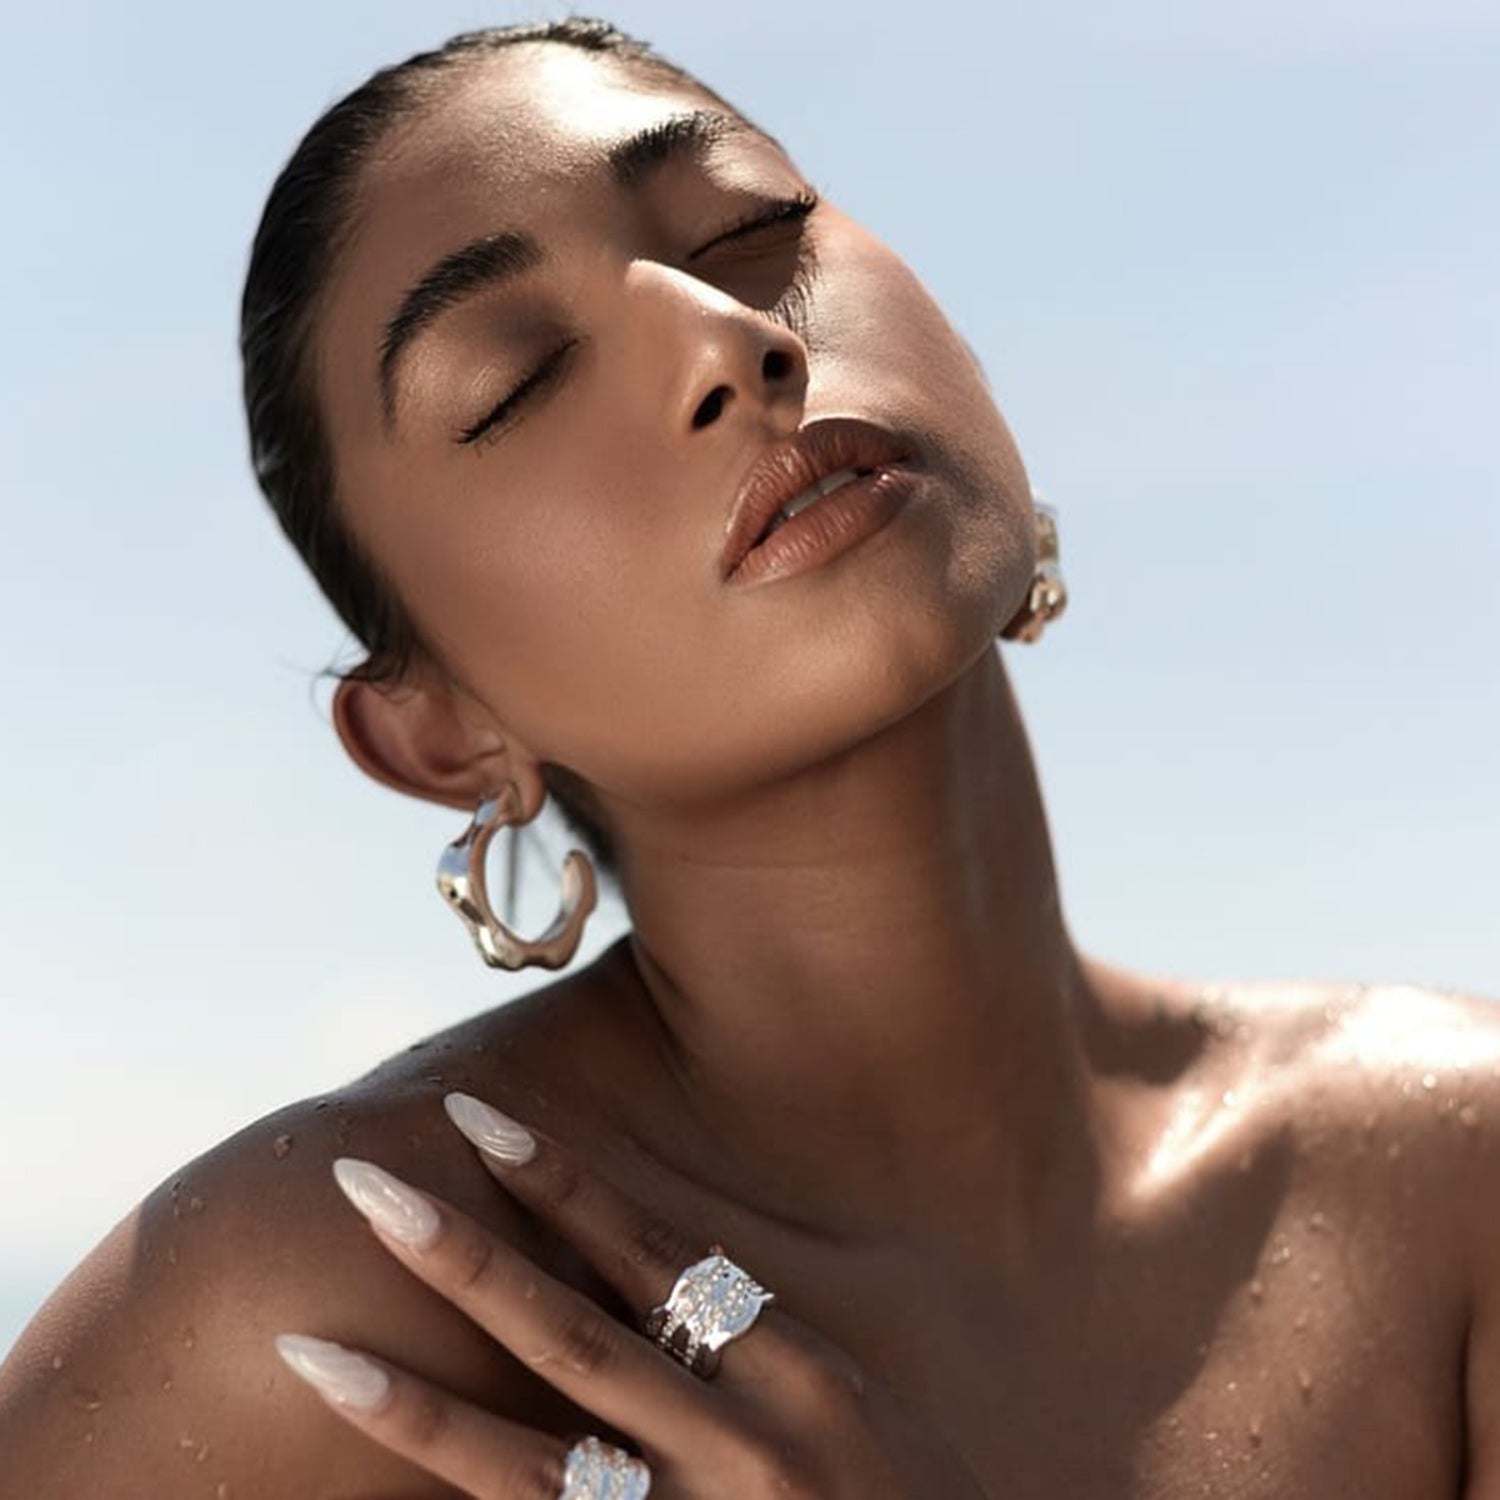 A woman with a sun-kissed complexion poses with her eyes closed and face lifted towards the sky. She wears large, stainless steel C-hoop earrings from Marianela's Exclusive Shop, LLC and multiple rings on her fingers. Her hair is slicked back, and her dewy skin glistens under natural light, exuding a sophisticated design.